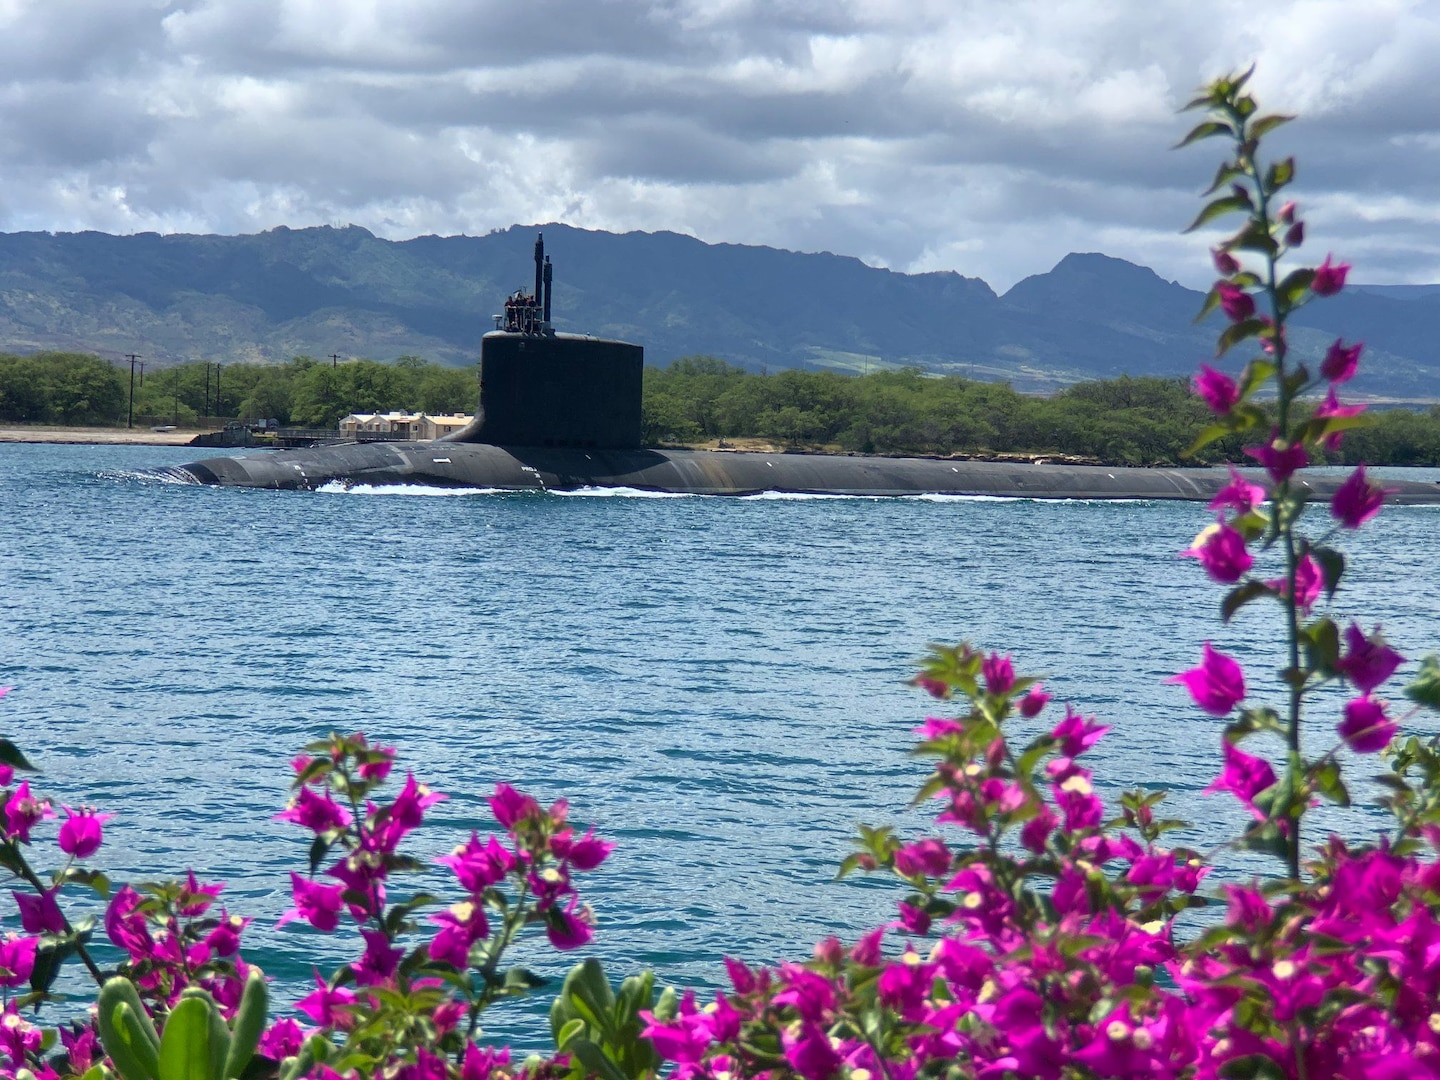 PEARL HARBOR, Hawaii (May 10, 2020) – USS Missouri (SSN 780), a Virginia-class fast-attack submarine, departs Pearl Harbor after completing a scheduled extended dry-docking selected restricted availability (EDSRA). Missouri's routine maintenance and modernization work was completed five days ahead of schedule after successful sea trials and certification. The submarine's recent availability required 2.2 million work-hours to complete more than 20,000 jobs that will ensure the ship remains fully operational for its planned 33-year service life.